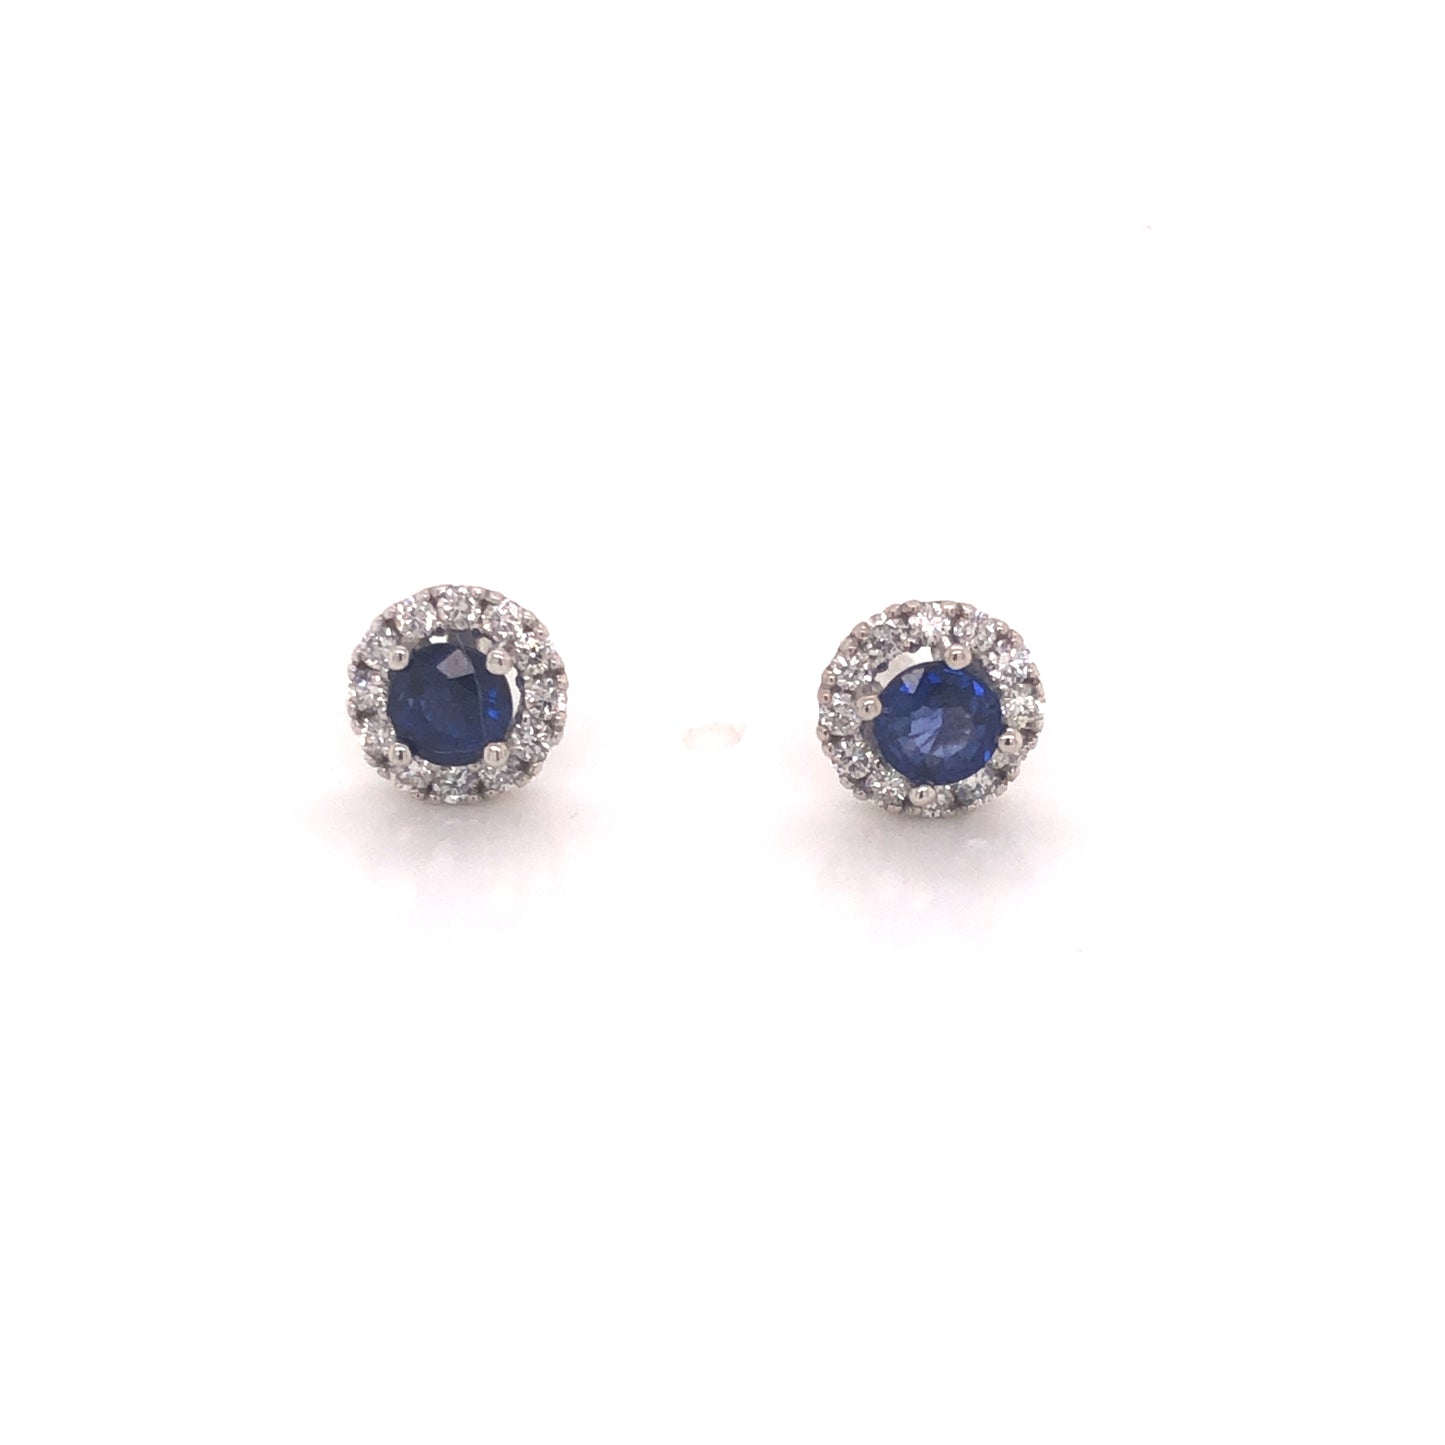 IMMEDIATE DELIVERY / Beatriz Sapphire Earring with Diamond Halo / 14k White Gold